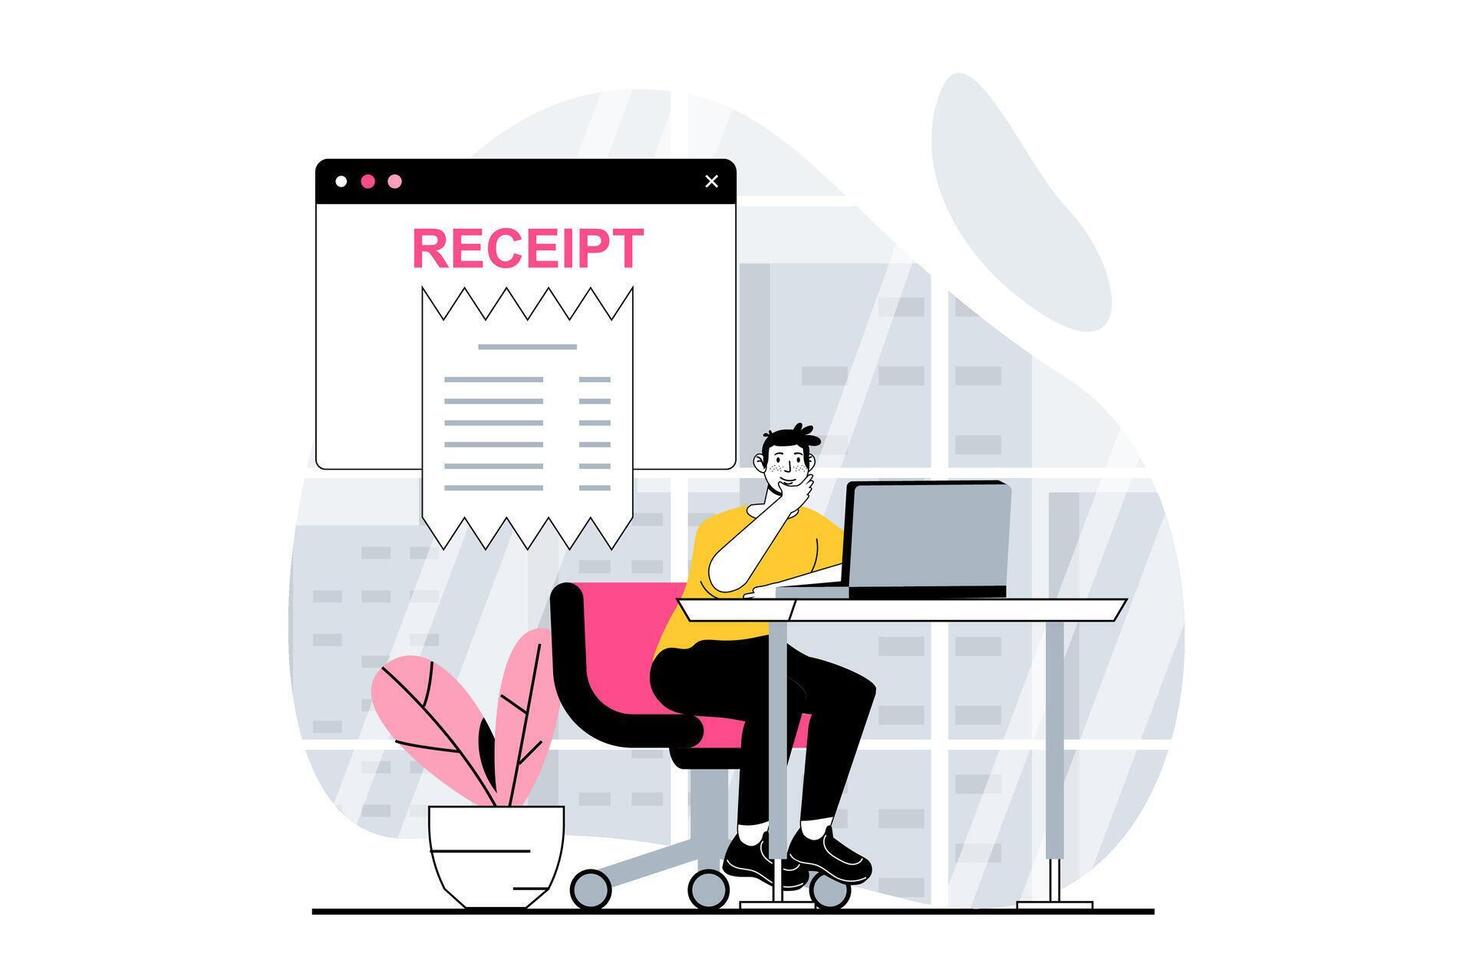 Electronic receipt concept with people scene in flat design for web. Man researching digital check with online paying for purchases. Vector illustration for social media banner, marketing material.